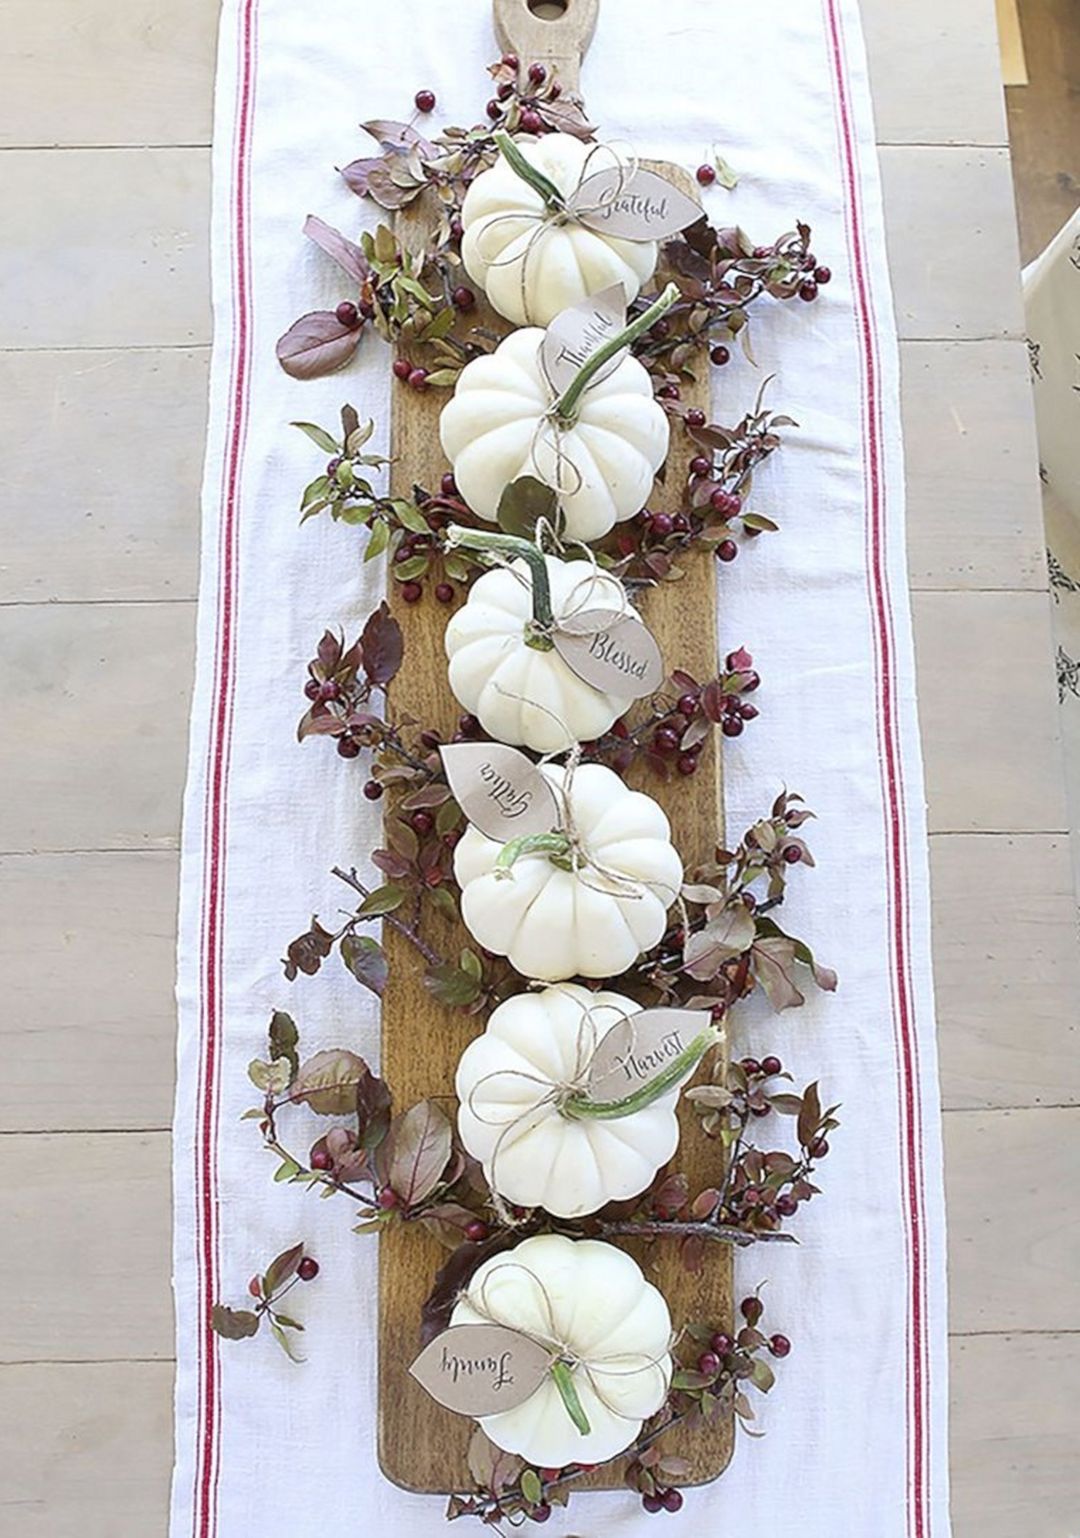 Pumpkin Place Card Centerpiece from Countryliving